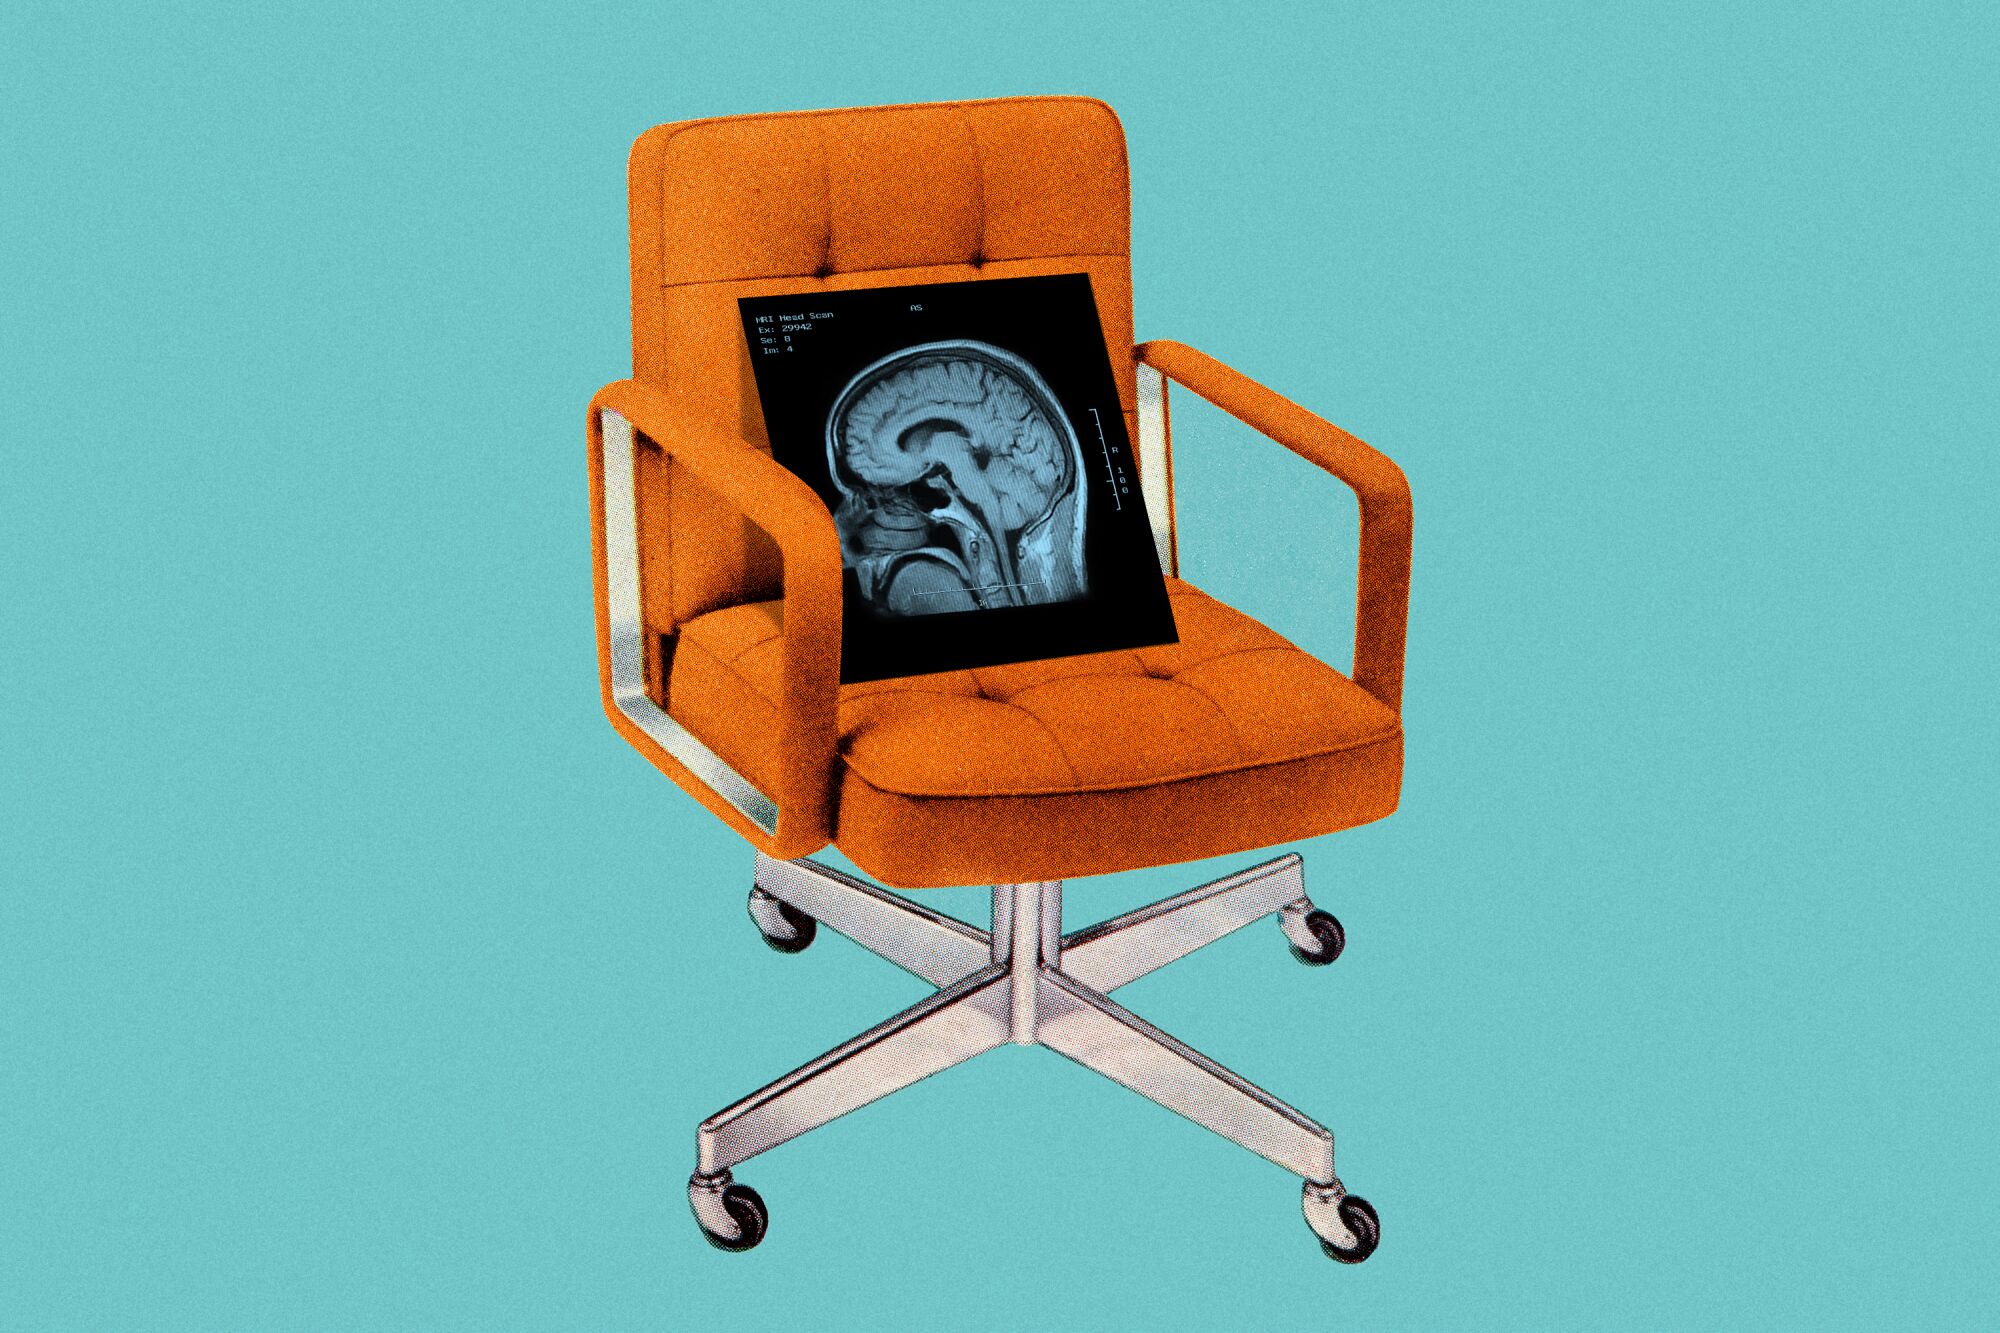 Photo illustration of an office chair with a brain scan resting on the seat.